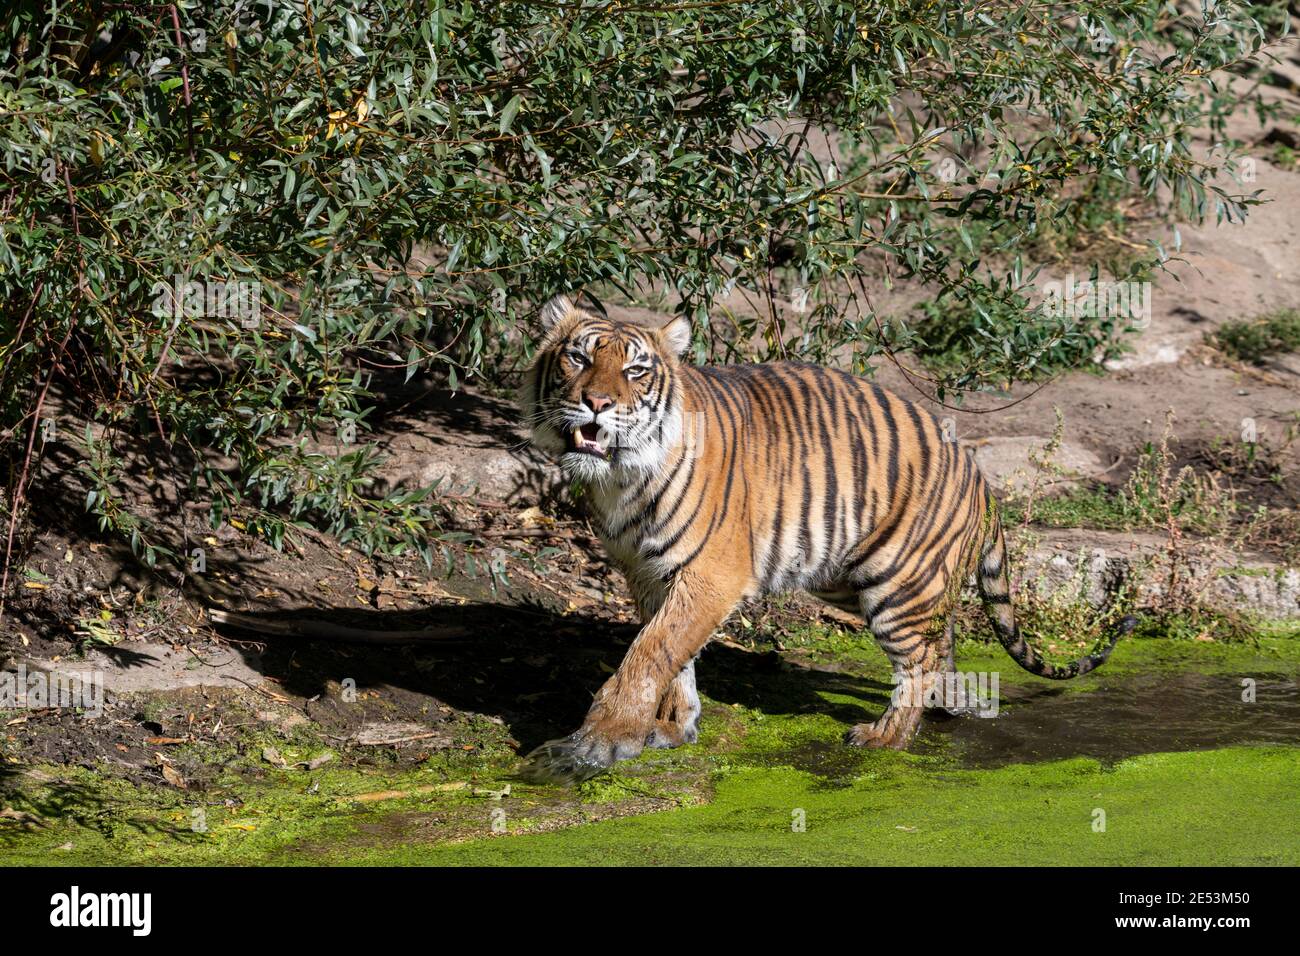 Tiger walking through shallow water with common duckweed on a sunny day with paws and rear being wet by the water Stock Photo